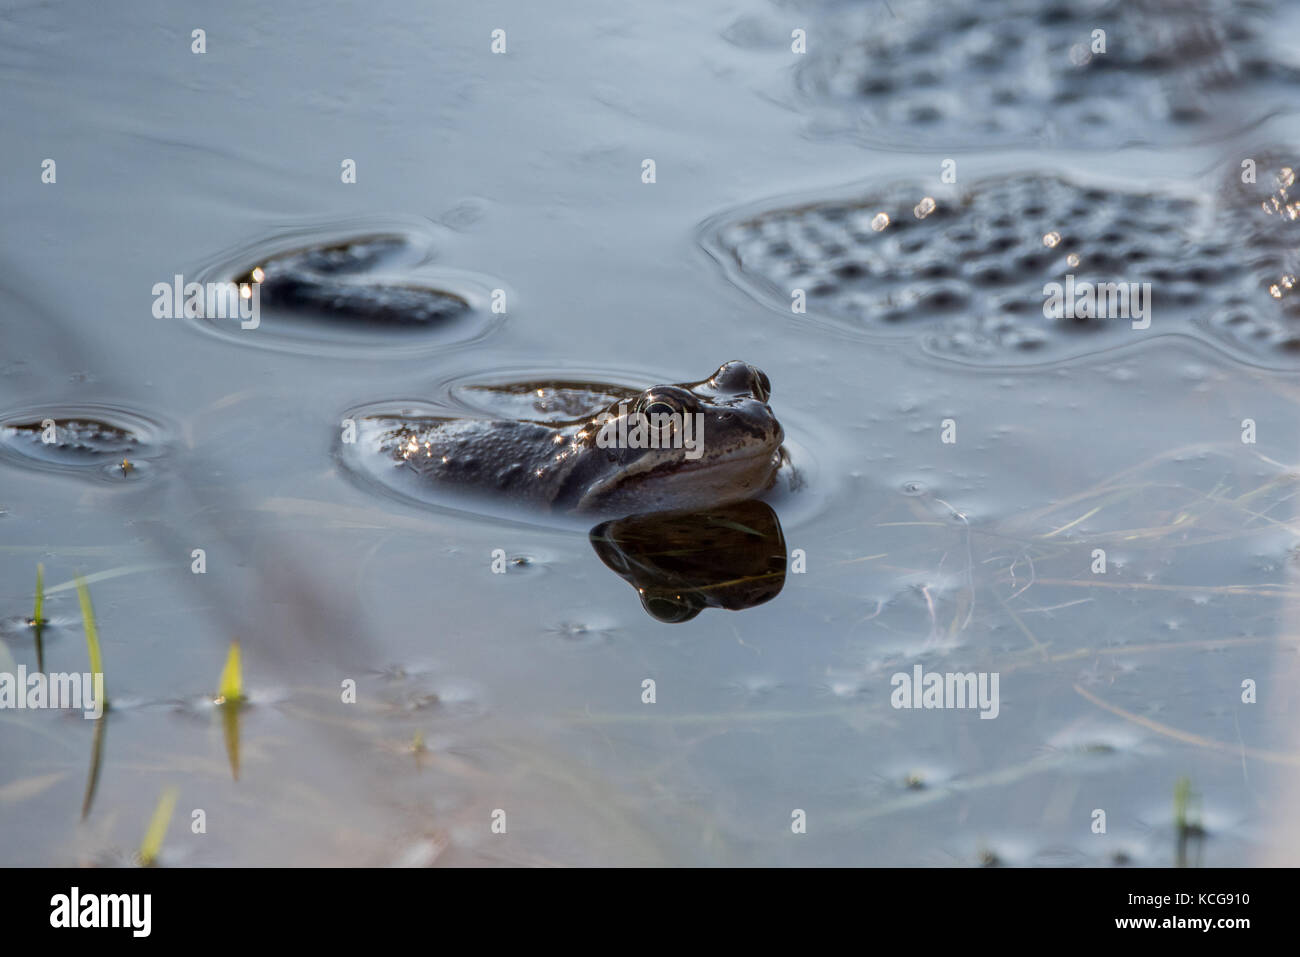 Frog in the water with eggs Stock Photo